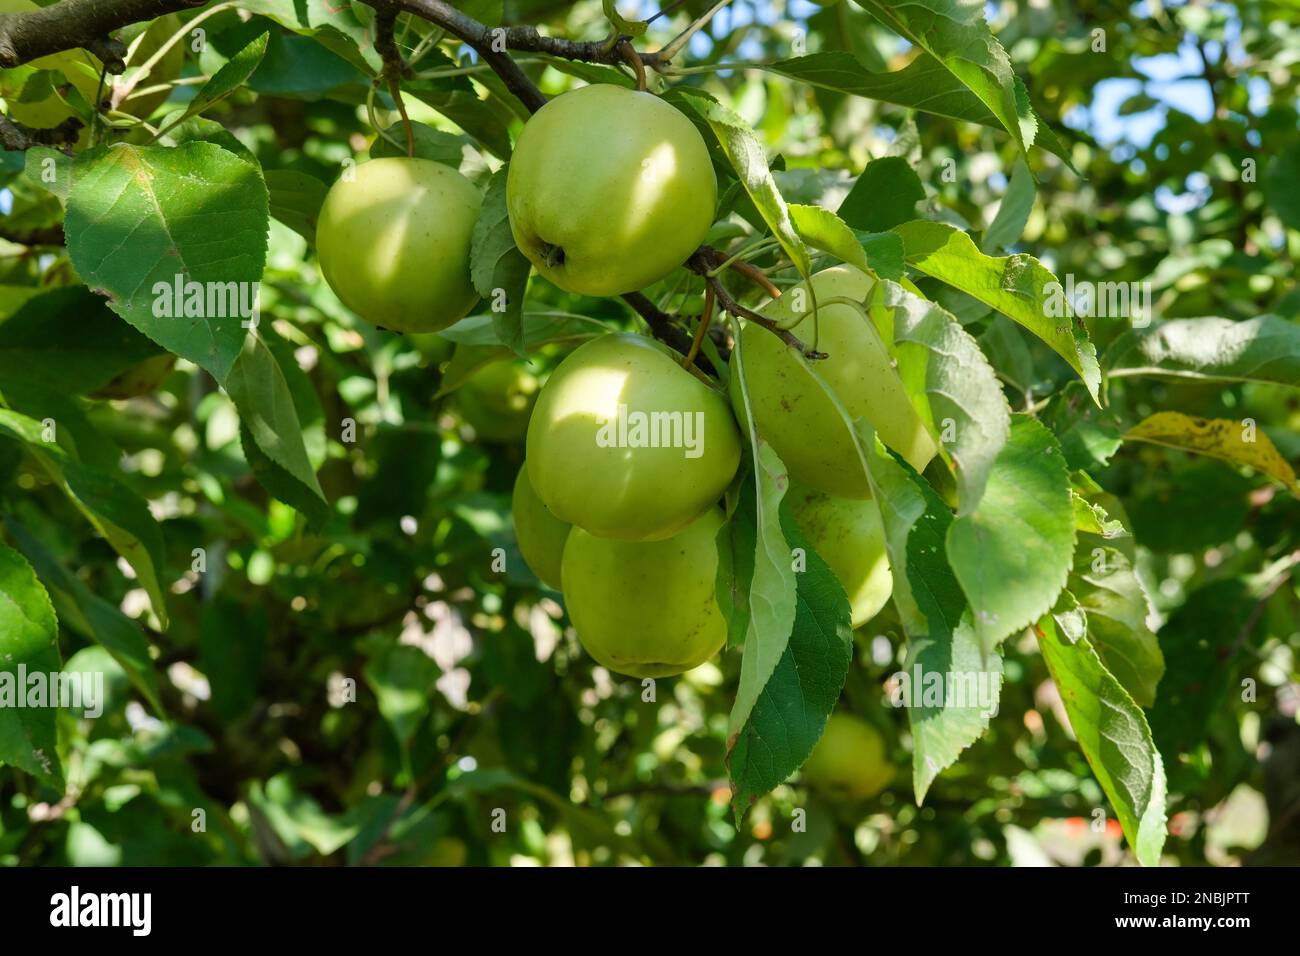 Malus domestica Golden Delicious, apple Golden Delicious, dessert apples growing in an English Orchard Stock Photo